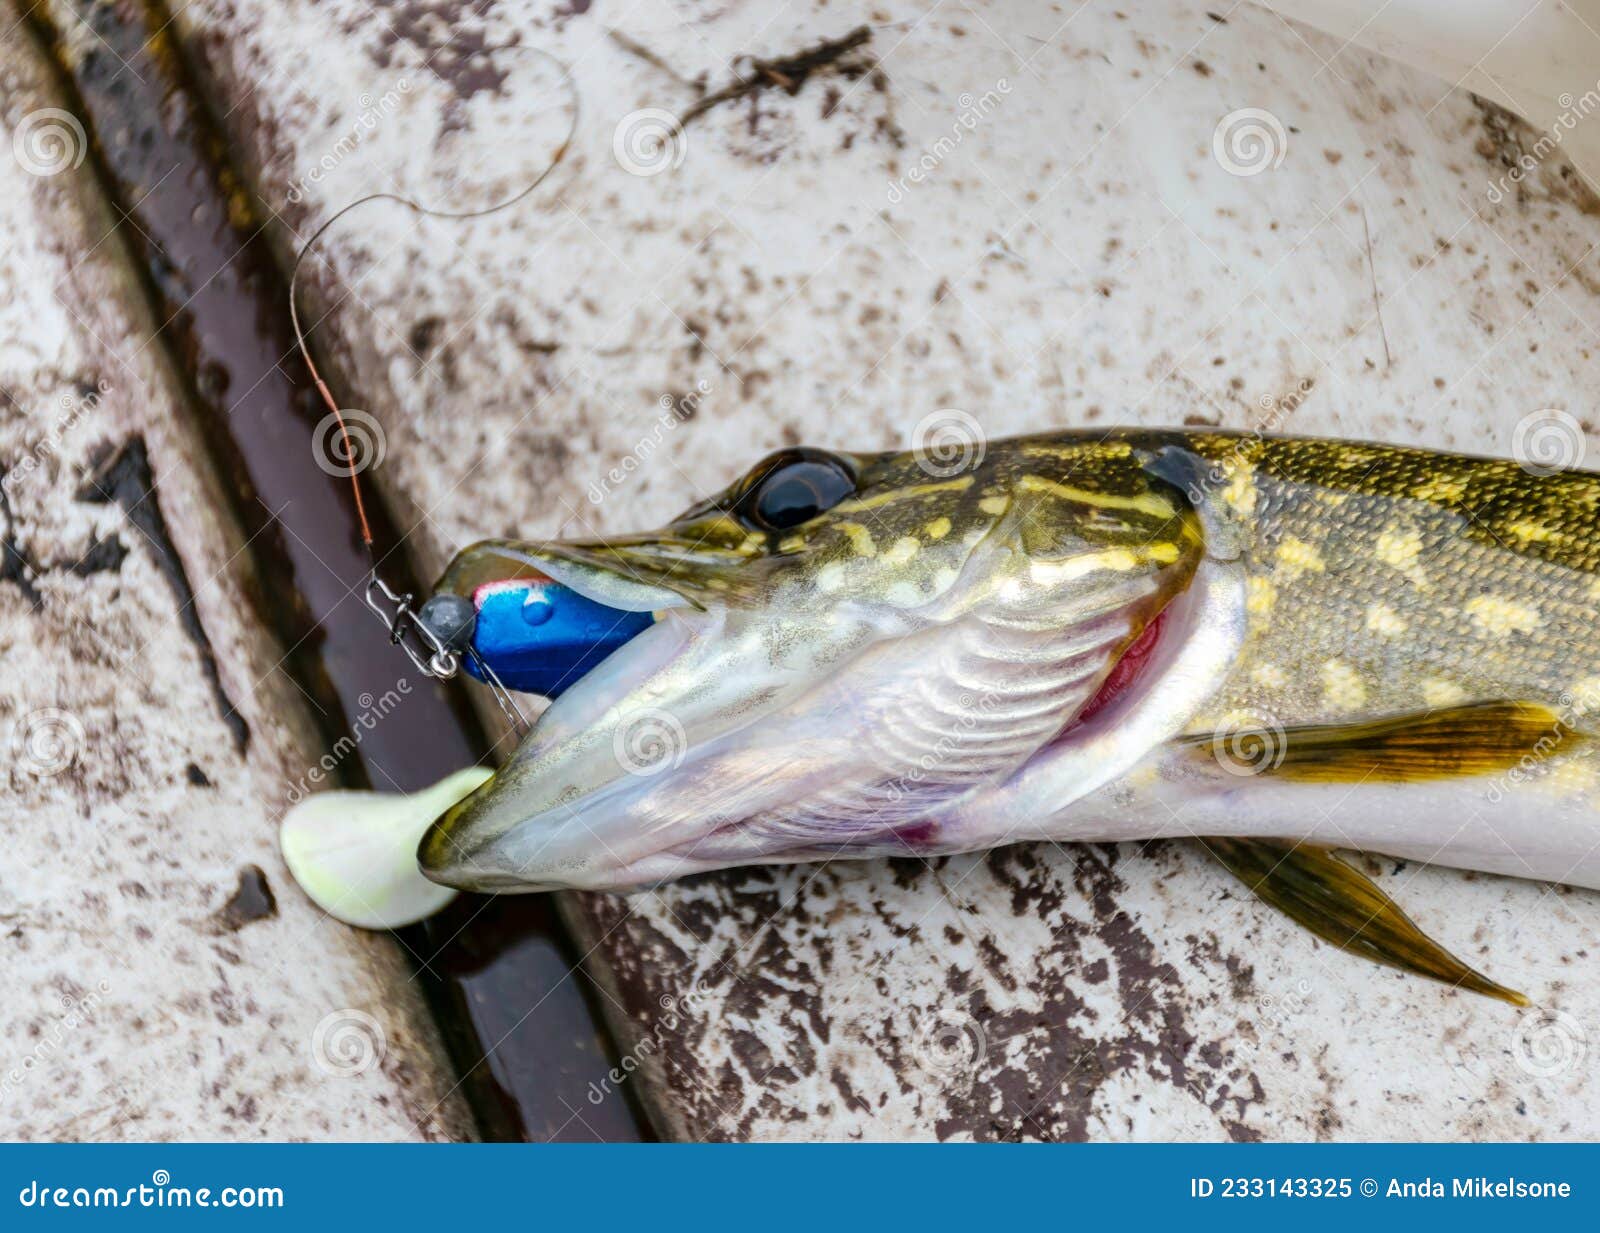 https://thumbs.dreamstime.com/z/small-pike-boat-floor-fishing-concept-picture-small-pike-boat-floor-fishing-concept-233143325.jpg